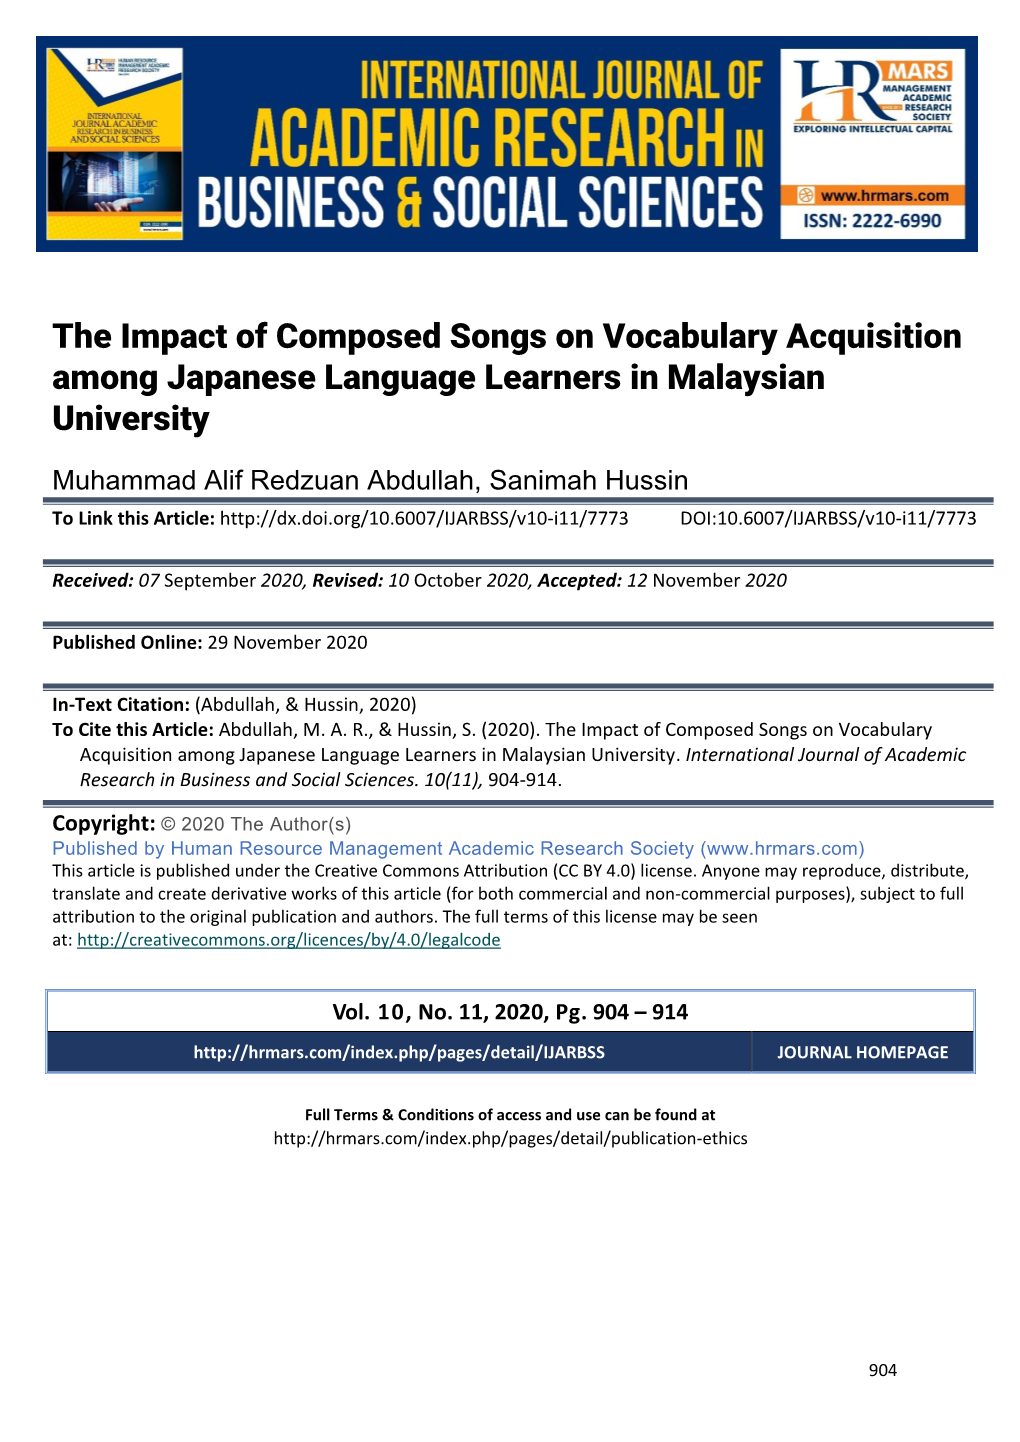 The Impact of Composed Songs on Vocabulary Acquisition Among Japanese Language Learners in Malaysian University